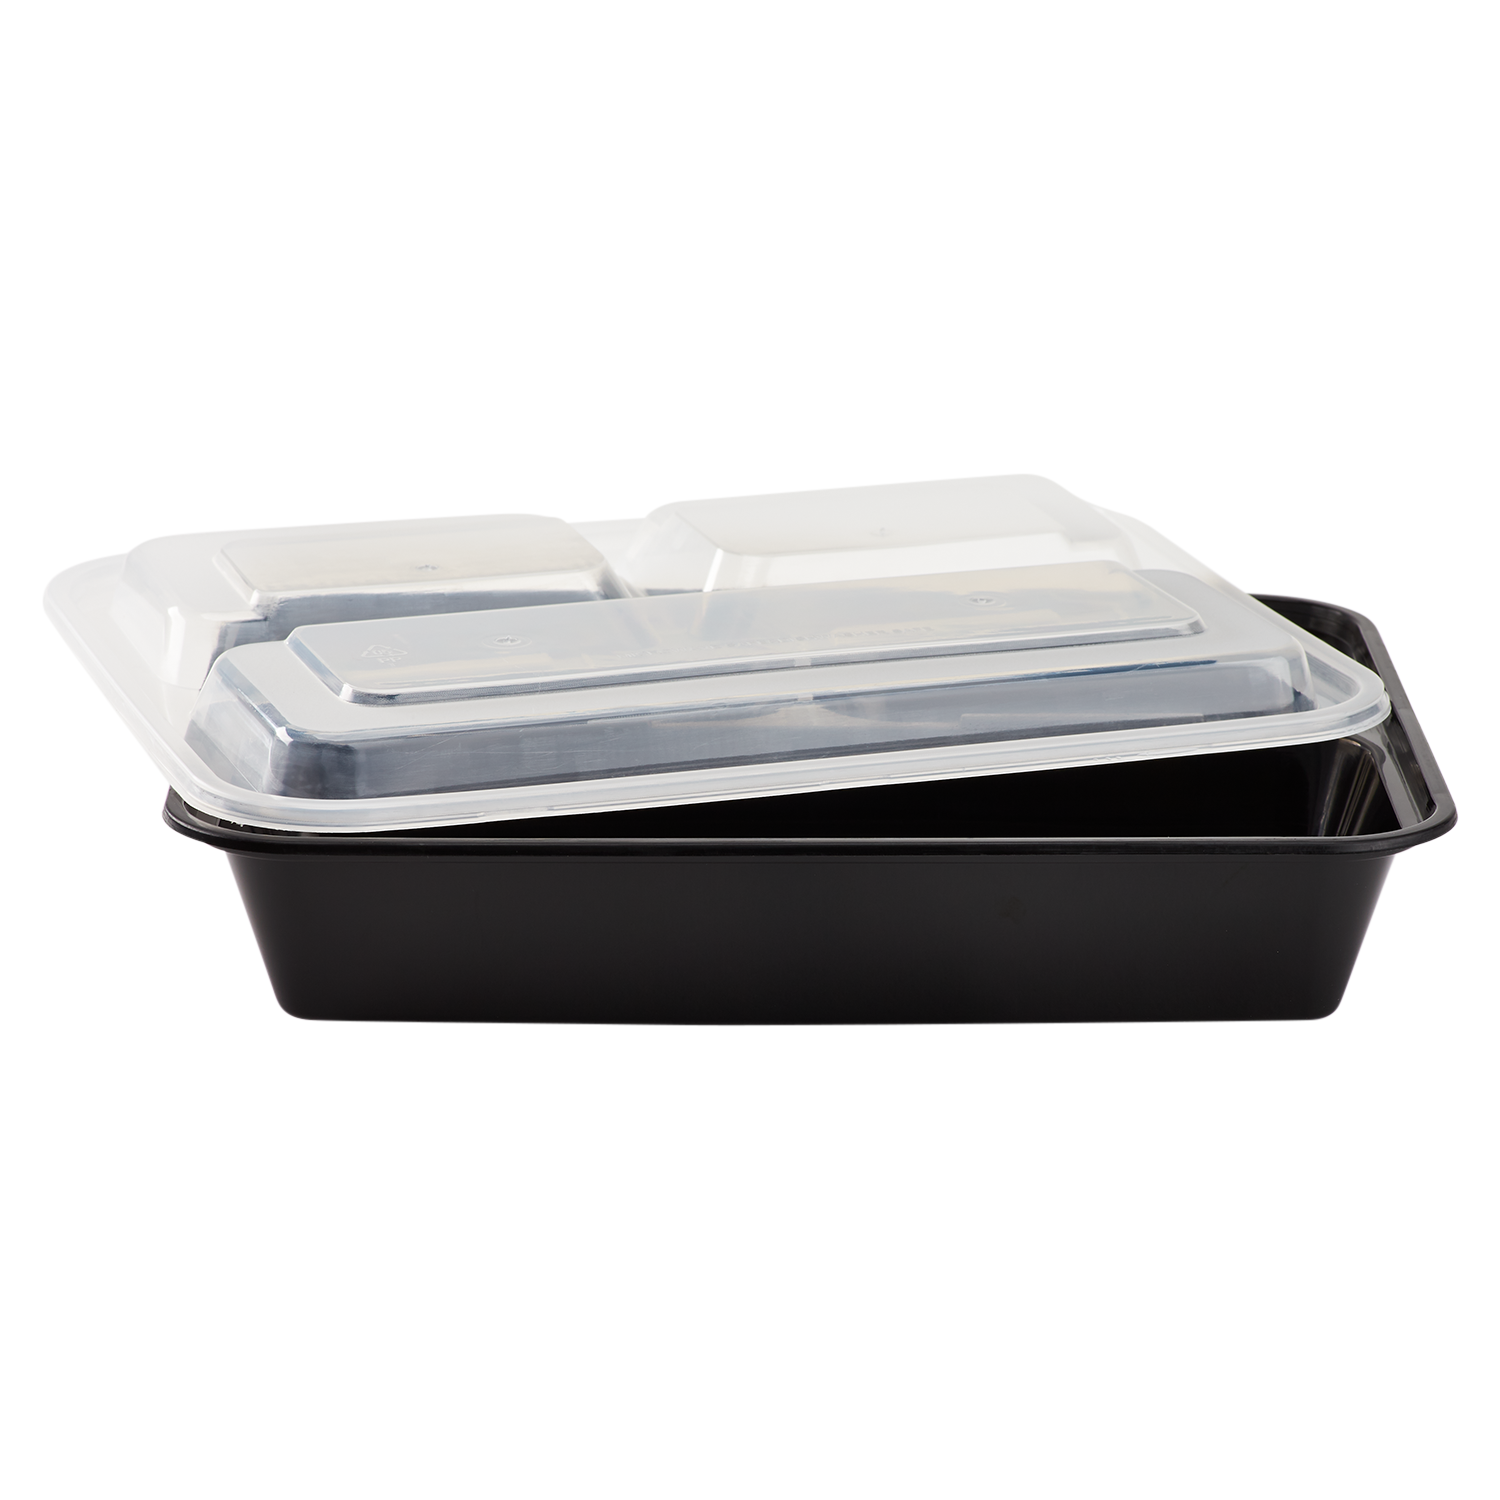  OTOR Bento Boxes Meal Prep Containers 3 Compartments